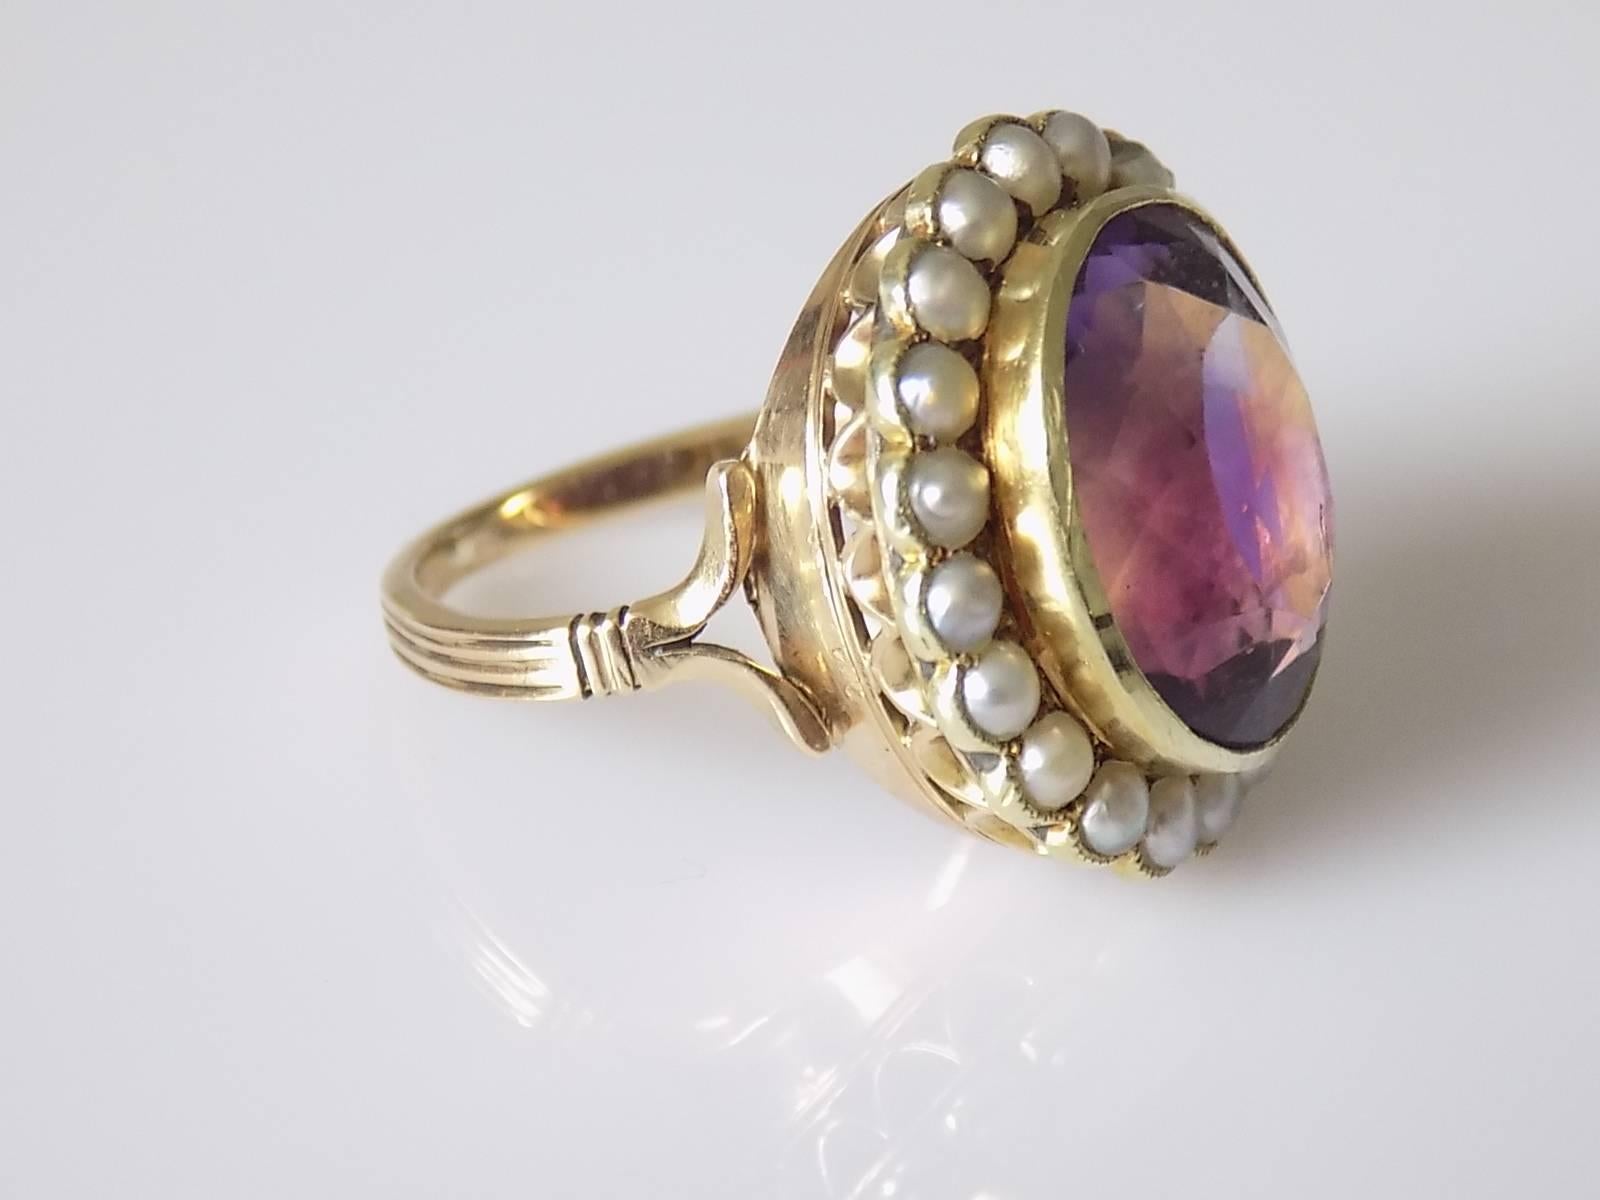 A Spectacular Victorian c.1880 15 Carat Gold, large Amethyst and split seed Pearl cluster ring. English origin.
Size M 1/2 UK, 6.75 US.
Height of the face 20mm.
Amethyst approx. 15mm x 12mm.
Weight 6.3gr.
Marked: JFB or JEB - maker, 15CT for 15